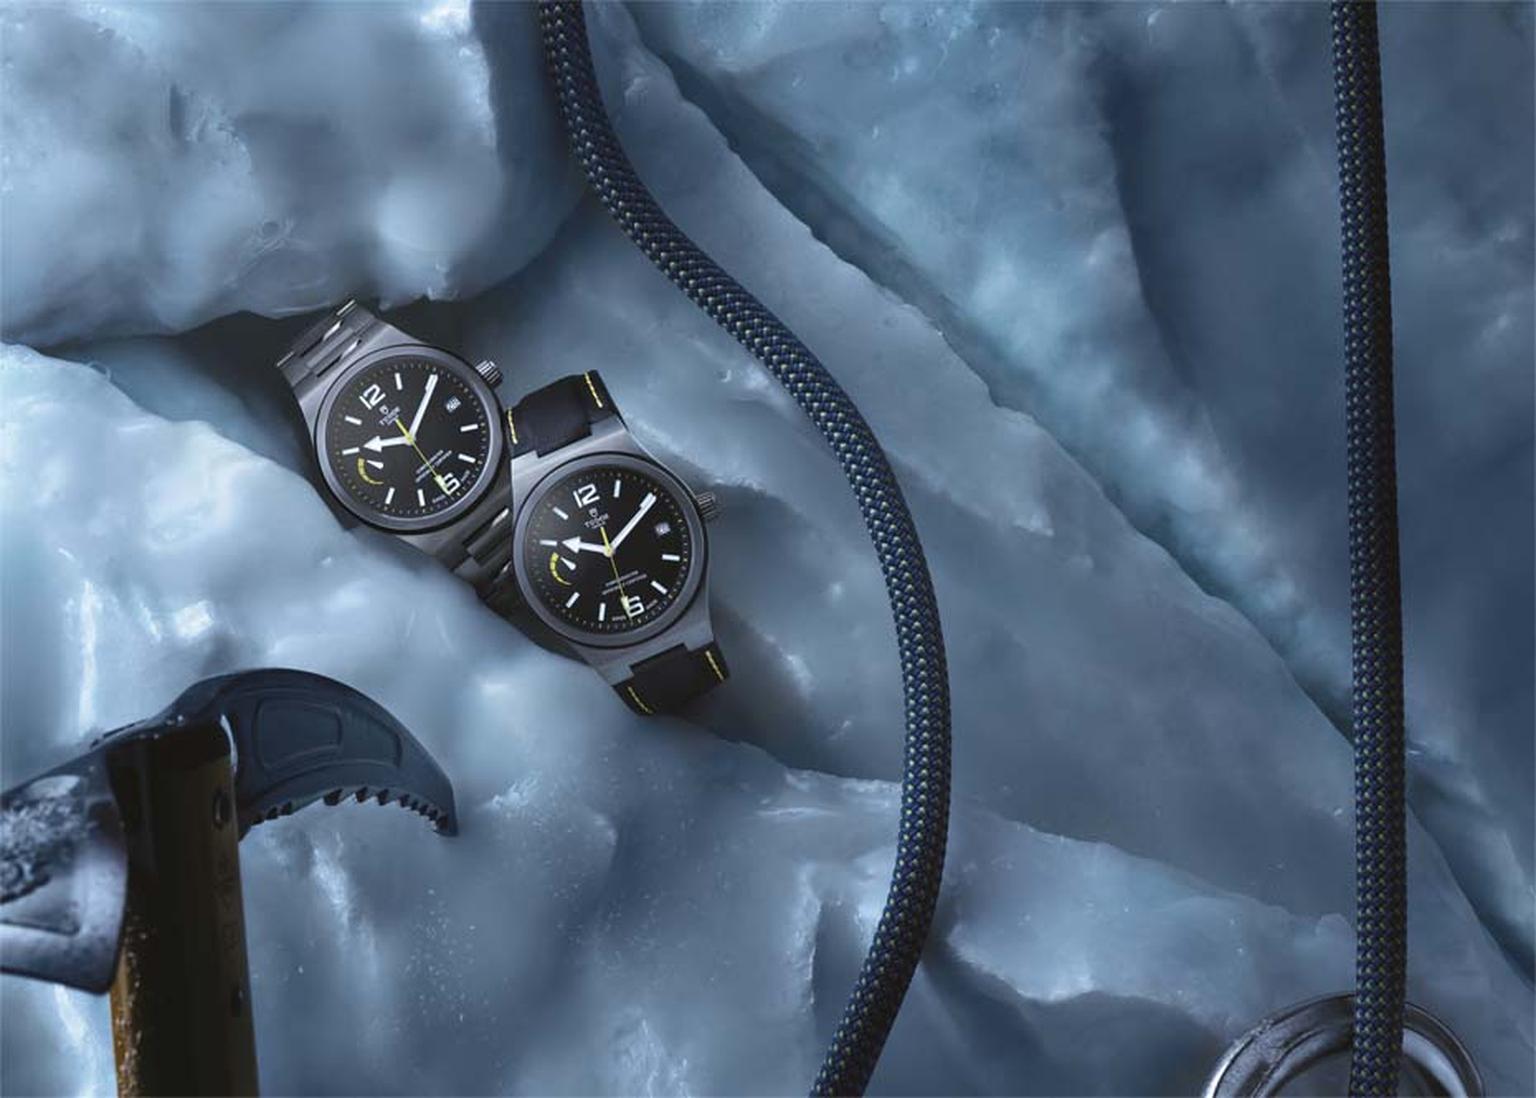 The new Tudor North Flag watch is designed for the modern-day adventurer and marks a milestone as being the first model to be fitted with Tudor's in-house movement. A generous 70-hour power reserve, water-resistance to 100 metres and a commanding presence